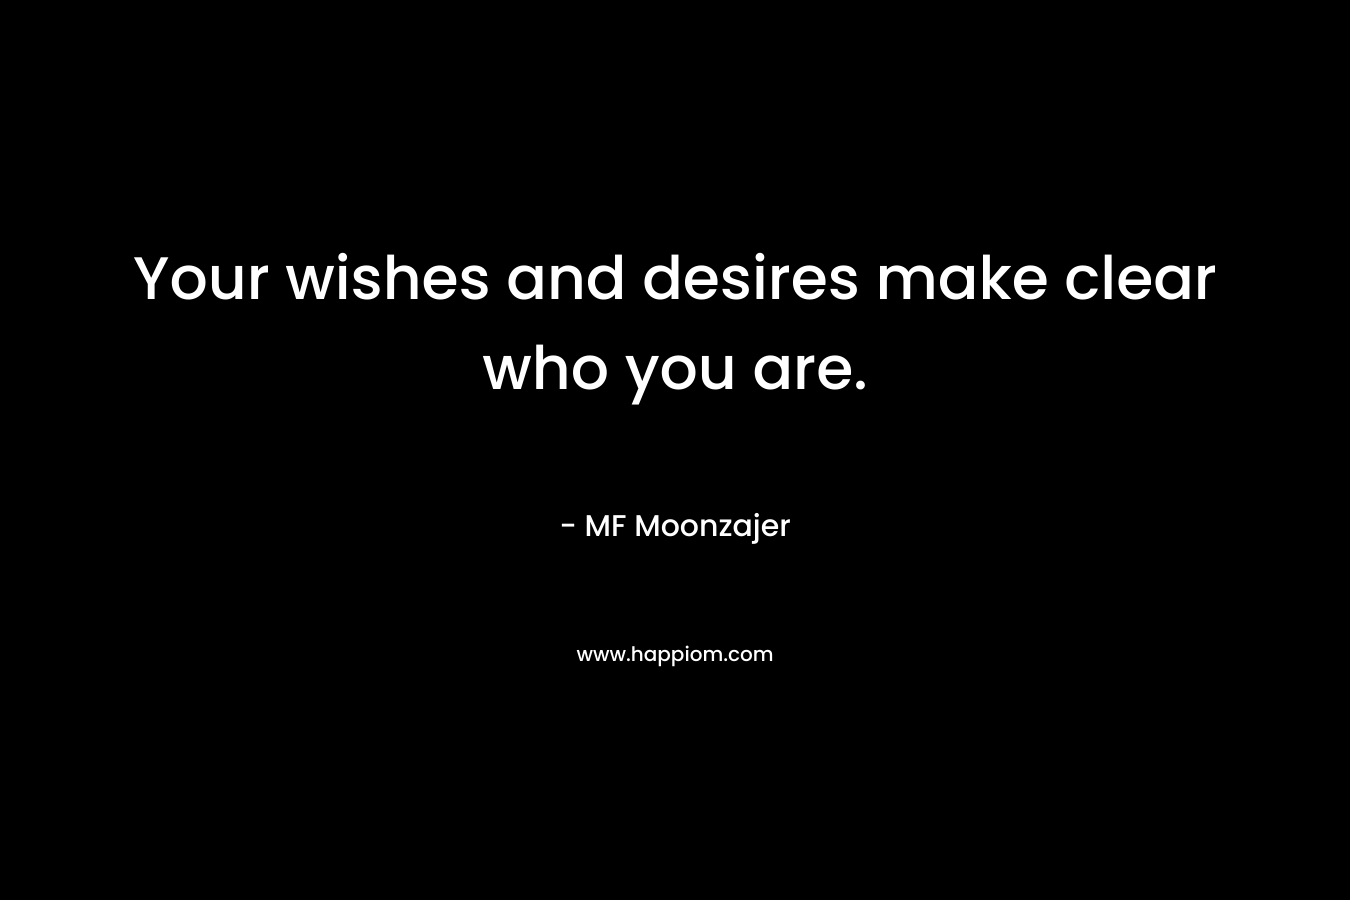 Your wishes and desires make clear who you are.